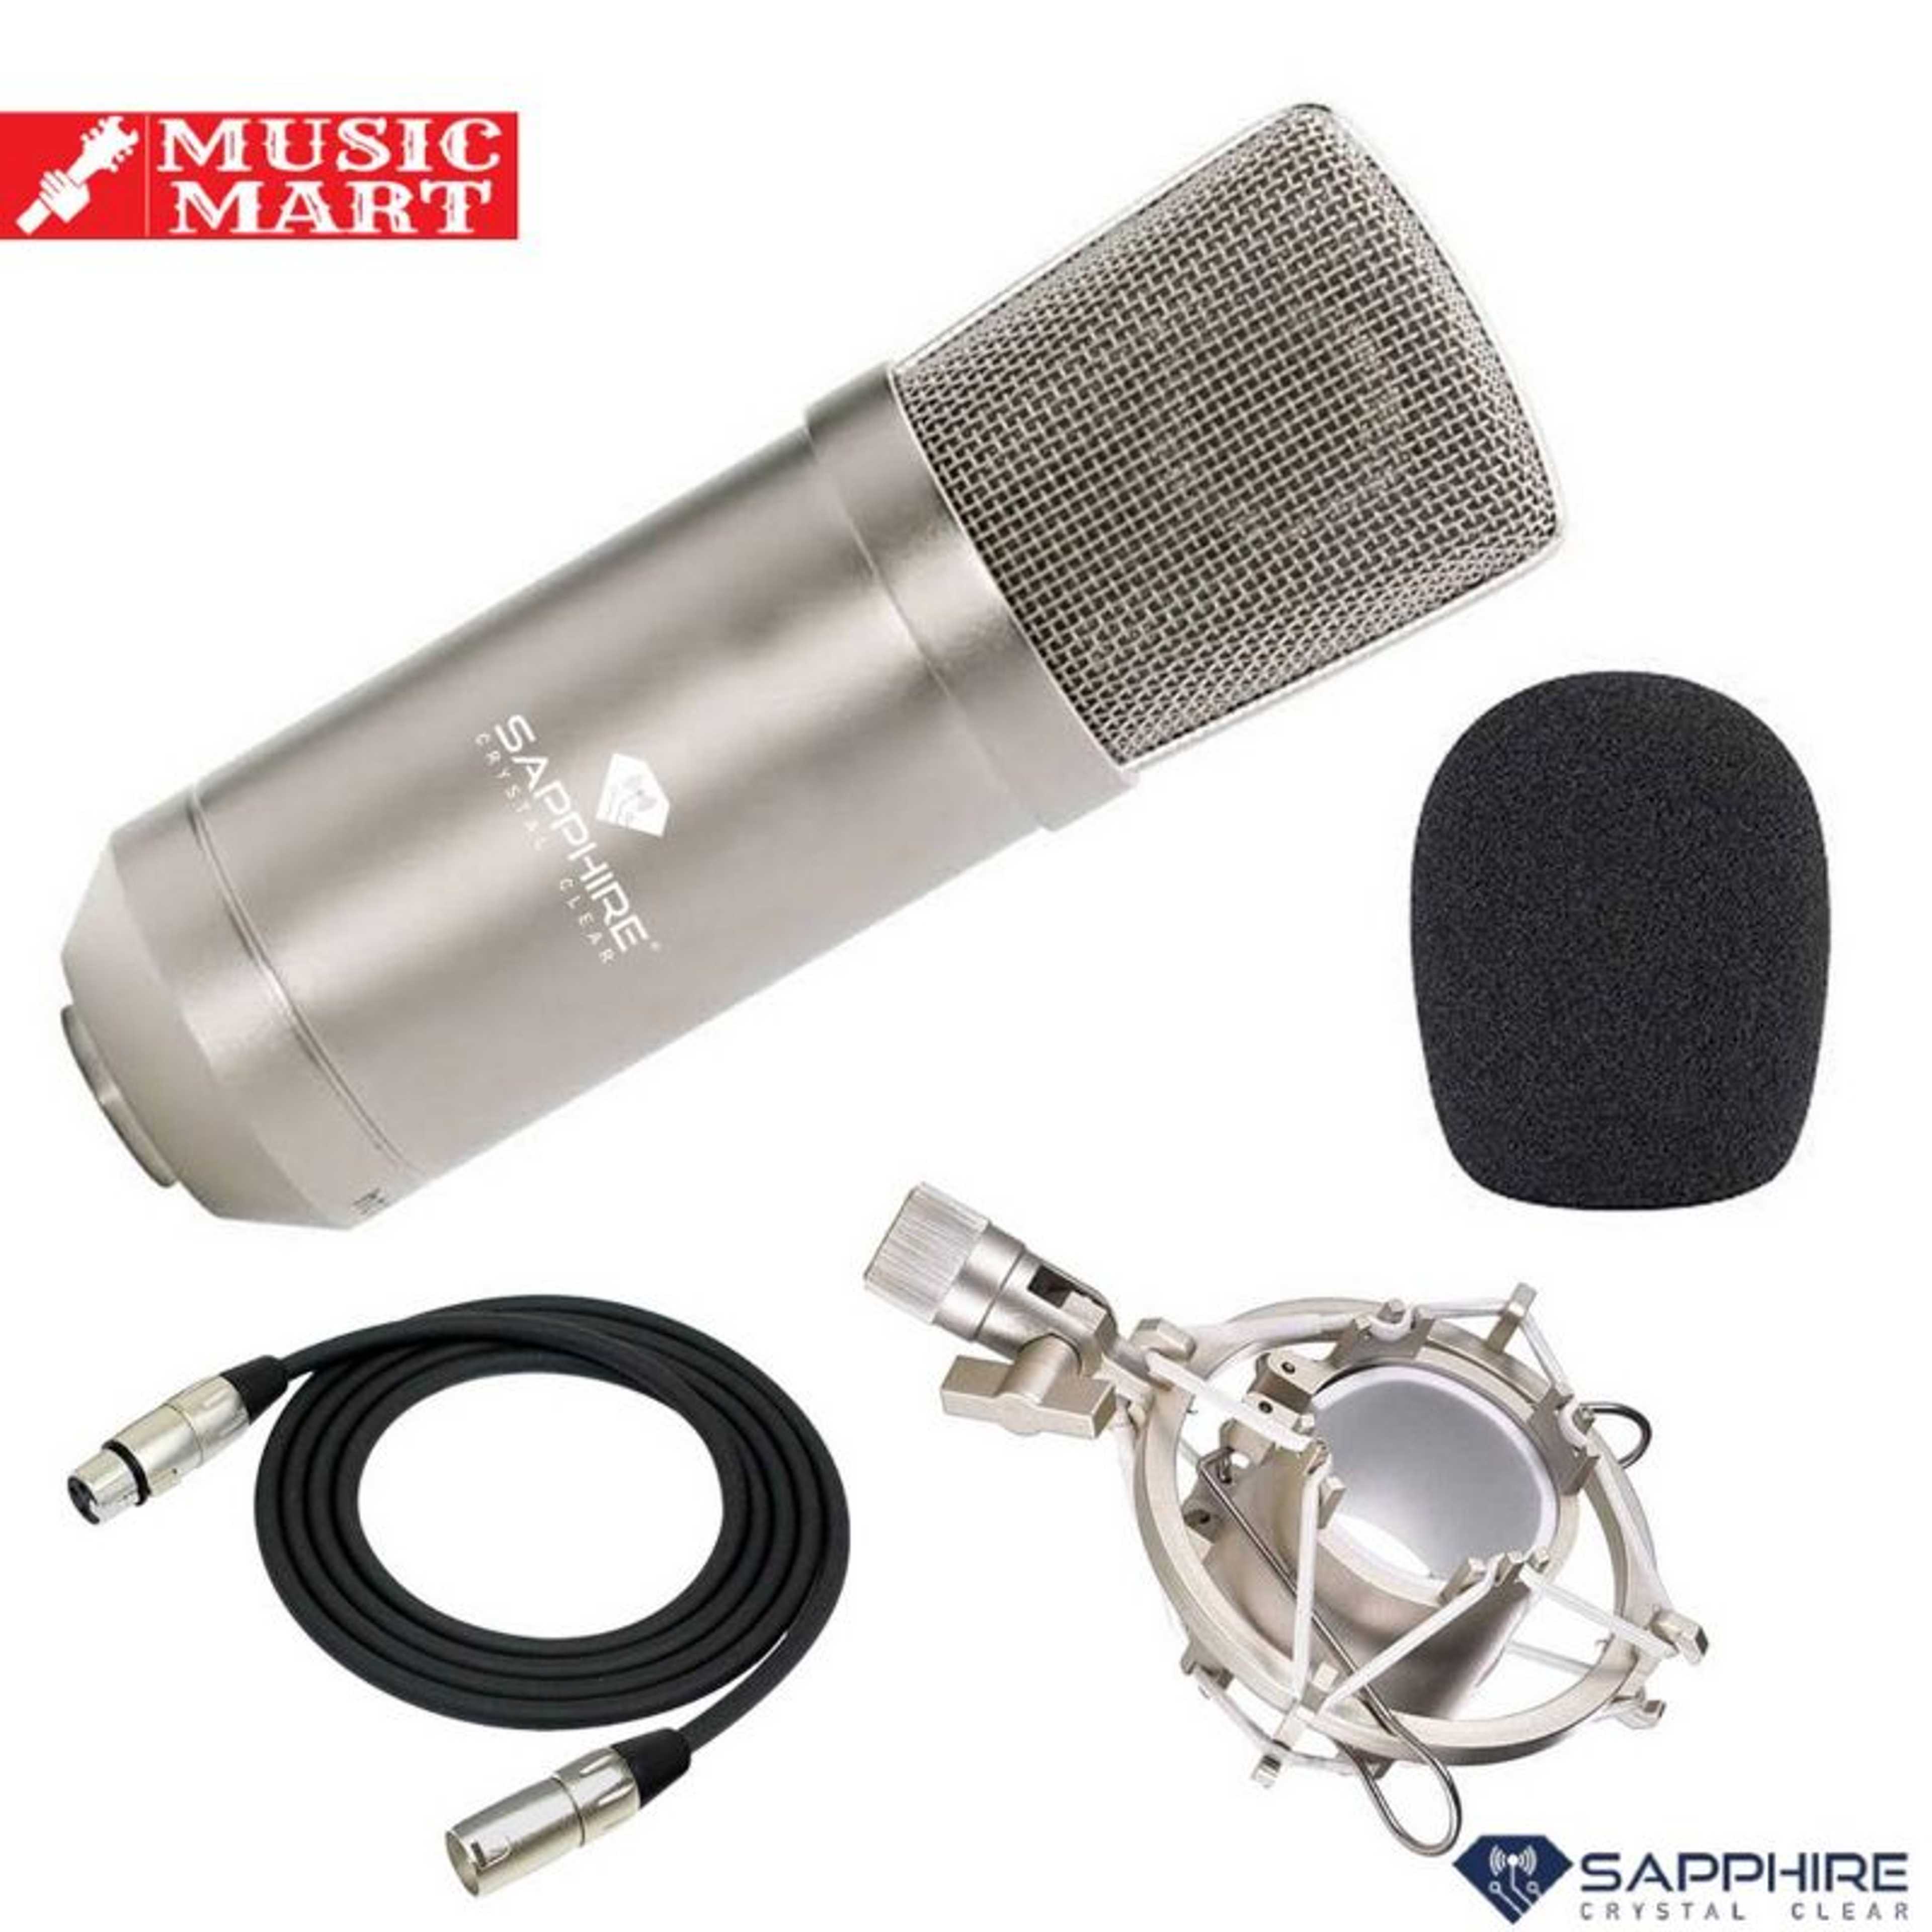 STUDIO CONDENSER MICROPHONE - INTERNET KARAOKE PC RECORDING, INSTRUMENT RECORDING - EXCELLENT QUALITY OF VOICE AND MUSIC PROFESSIONAL - LOW NOISE, WIDE DYNAMIC RANGE AND STRONG SOUND PRESSURE - PRECISE UNIDIRECTIONAL POLAR PATTERN